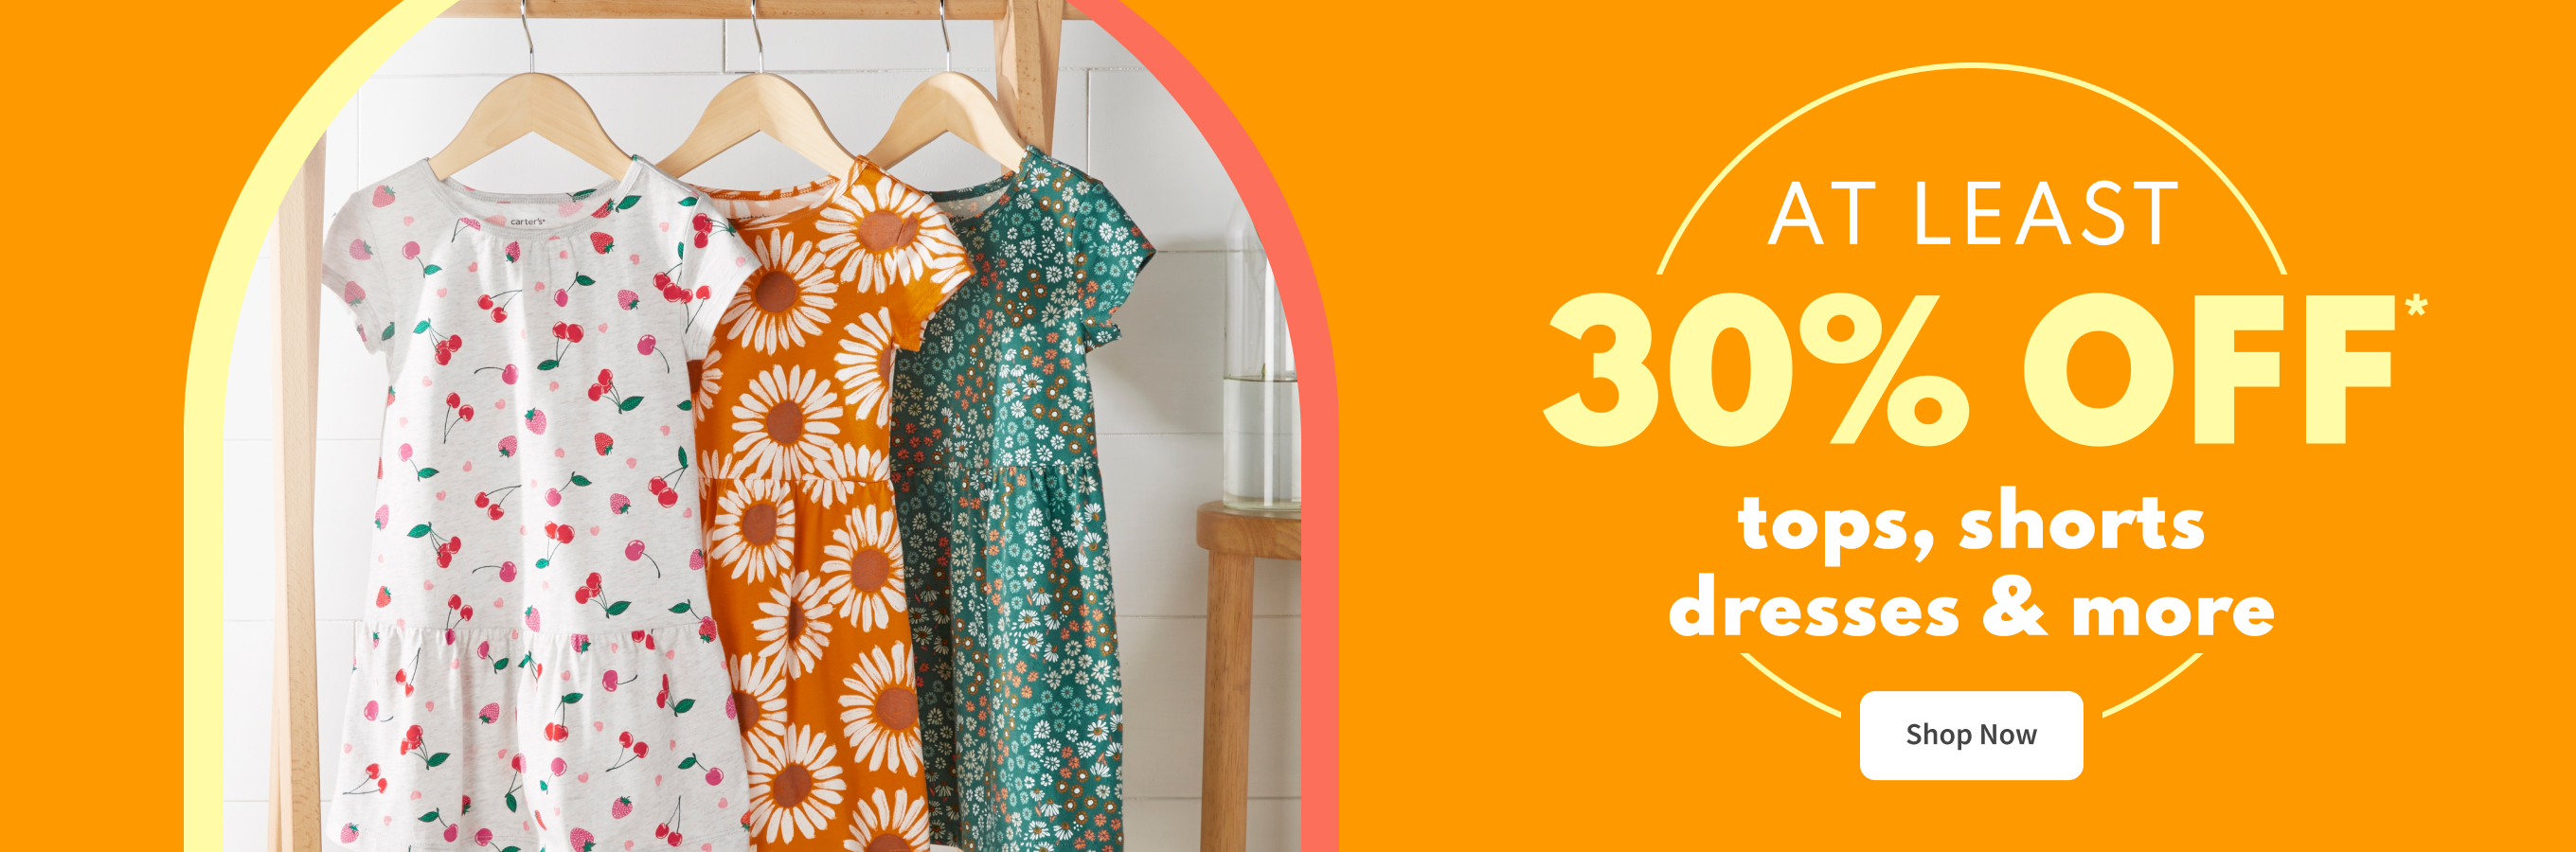 AT LEAST | 30% OFF* | tops, shorts dresses & more | Shop Now